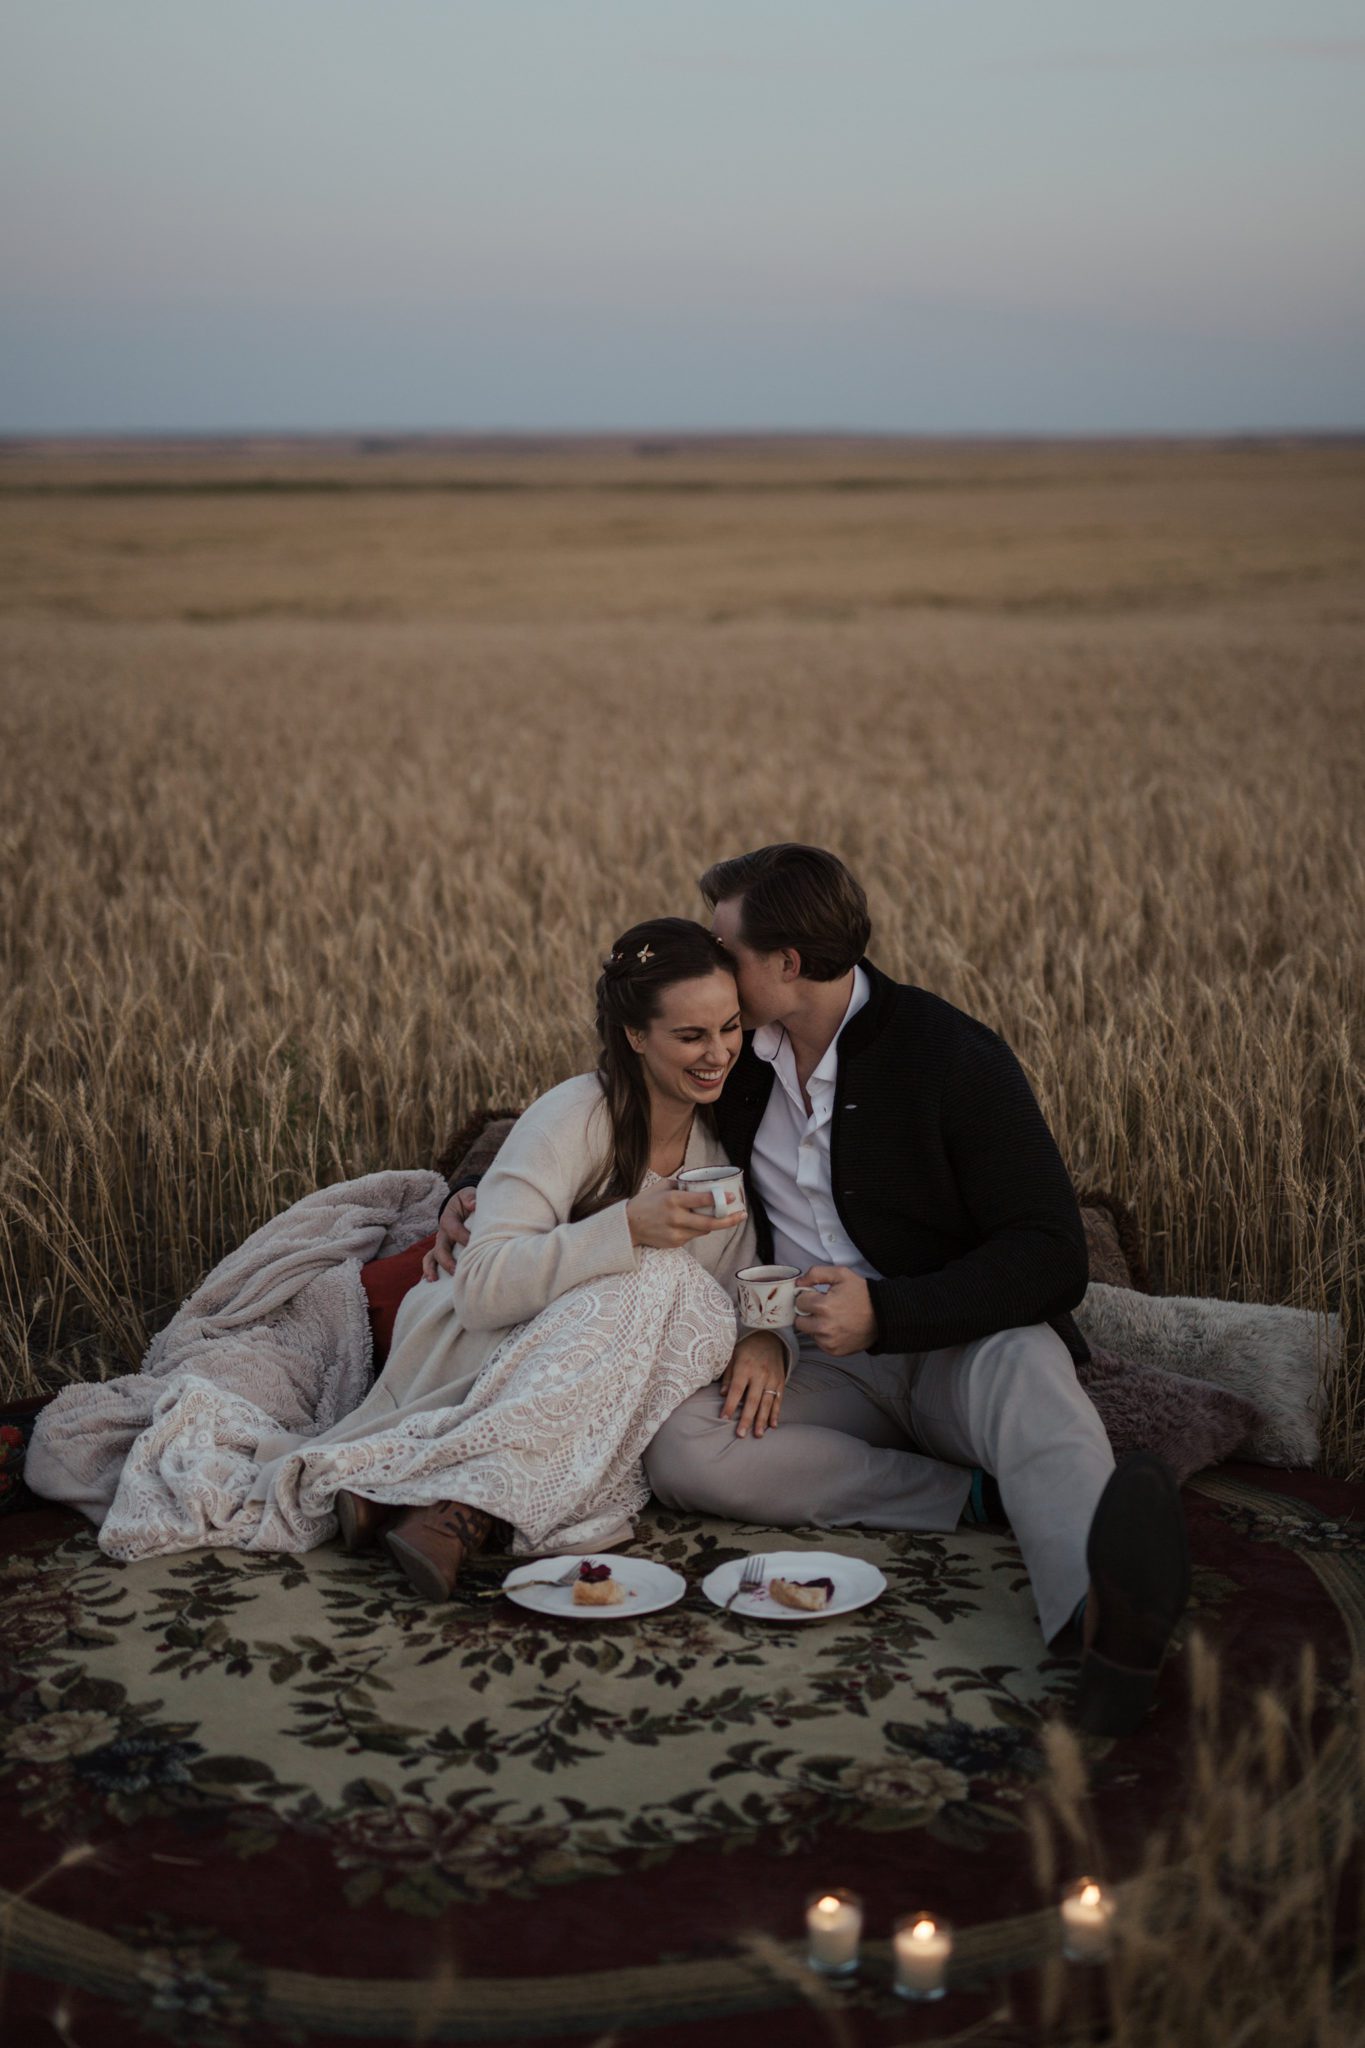 A small farmyard picnic in a rural countryside field, the bride and groom enjoy warm drinks in vintage mugs and berry galette, fall vow renewal inspiration. 